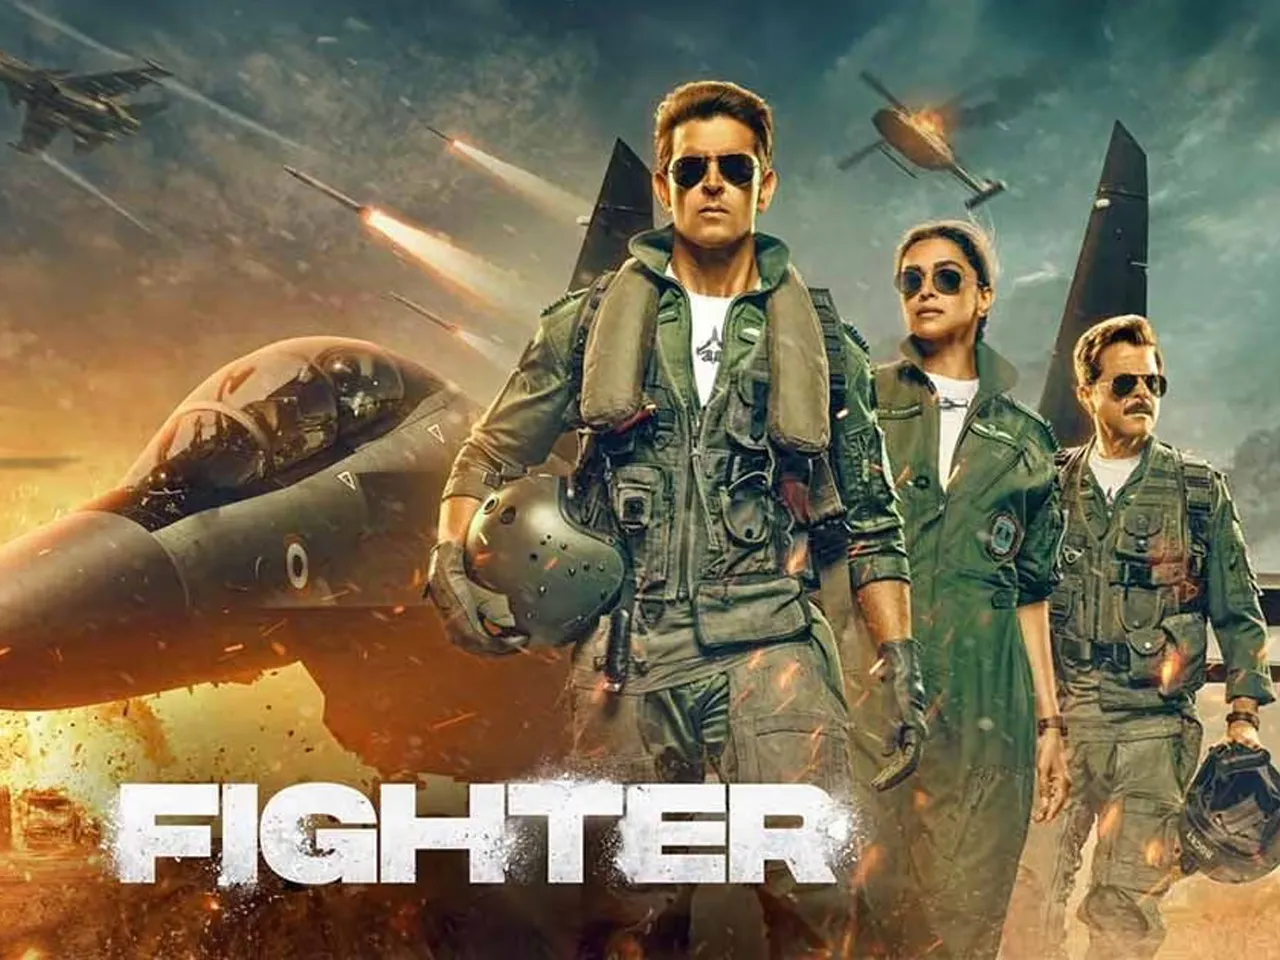 Fighter review: A massy entertainer with impressive aerial action and a stellar cast!